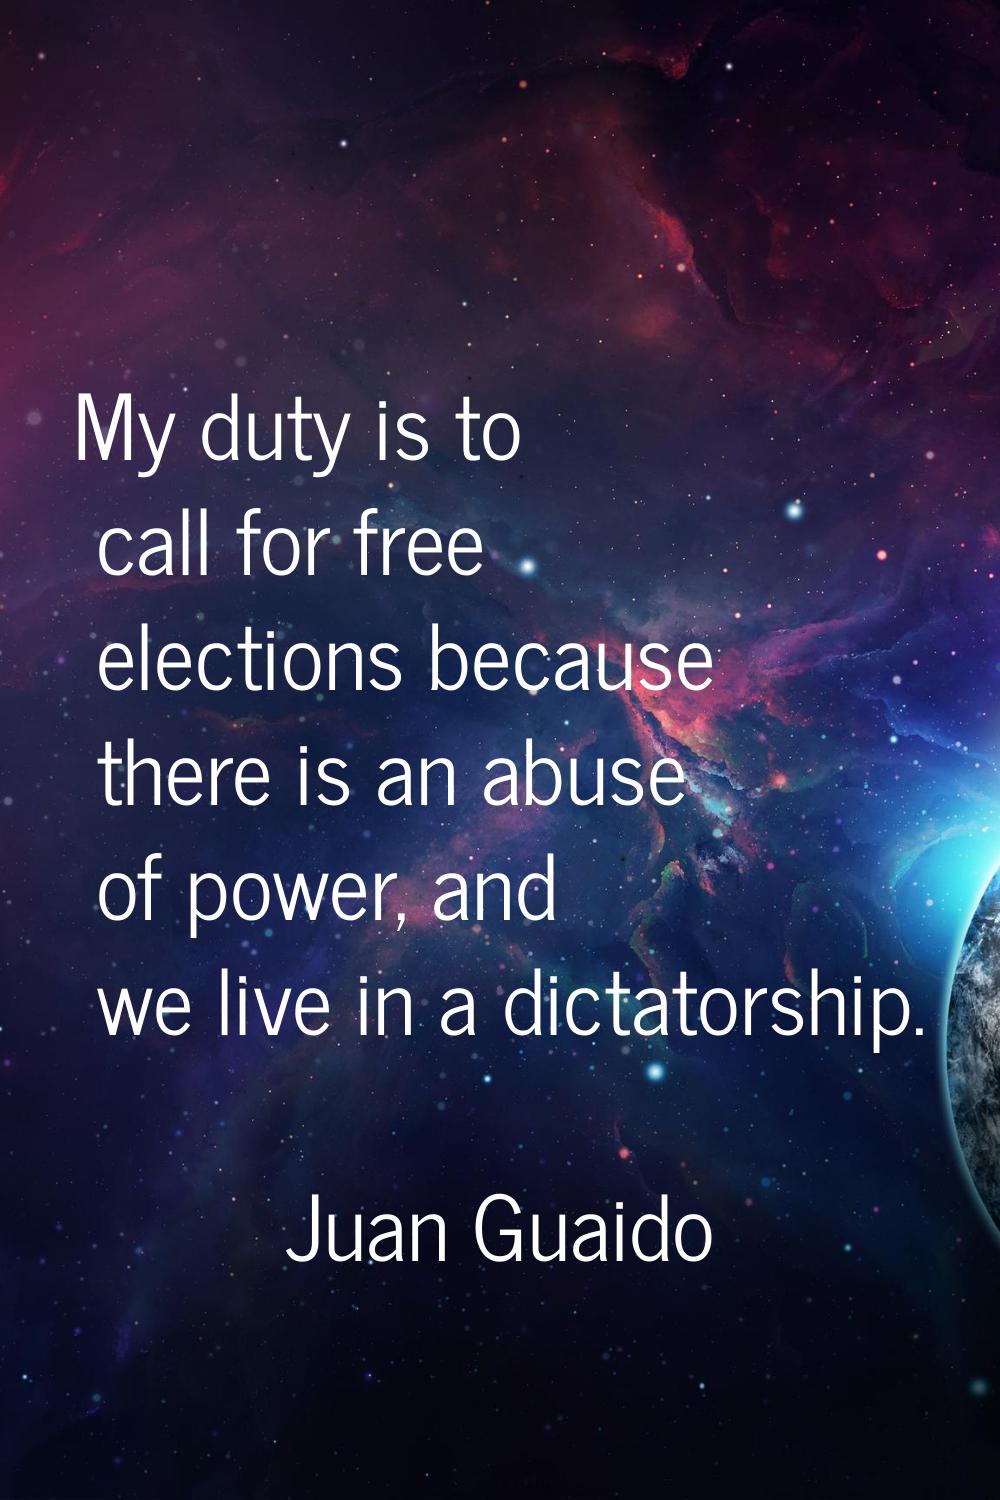 My duty is to call for free elections because there is an abuse of power, and we live in a dictator